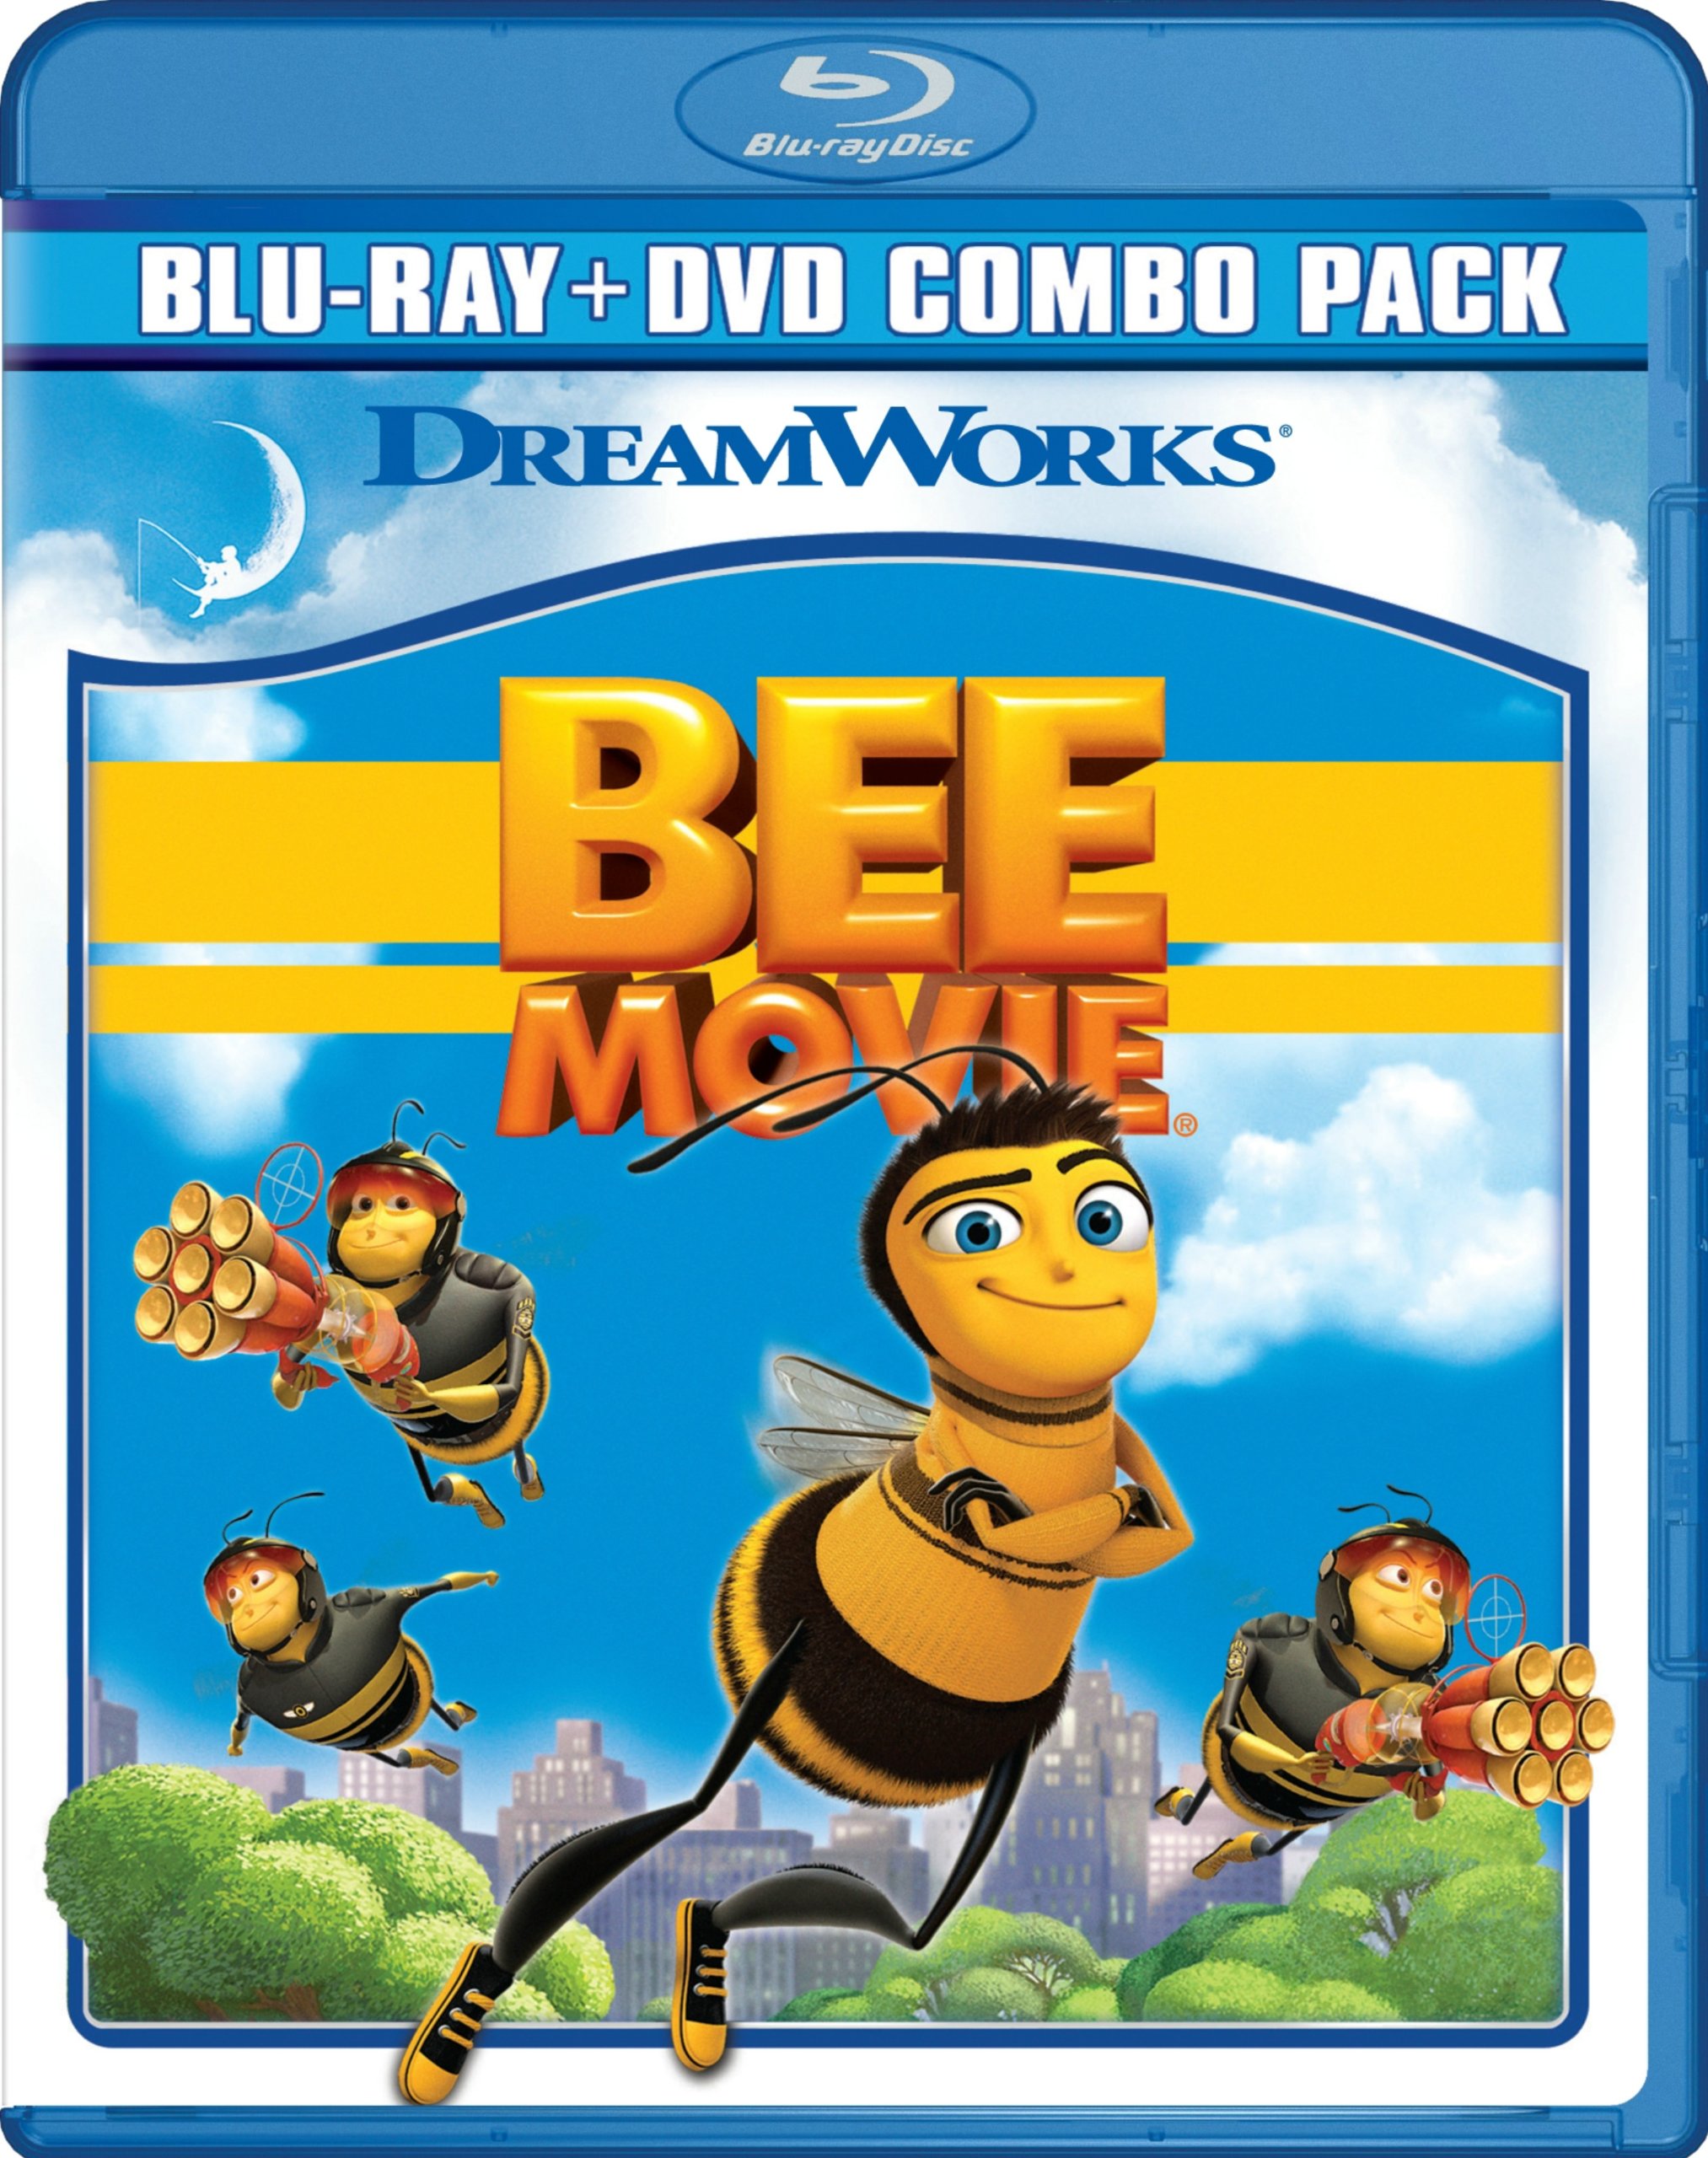 Bee Movie DVD Release Date March 11, 2008